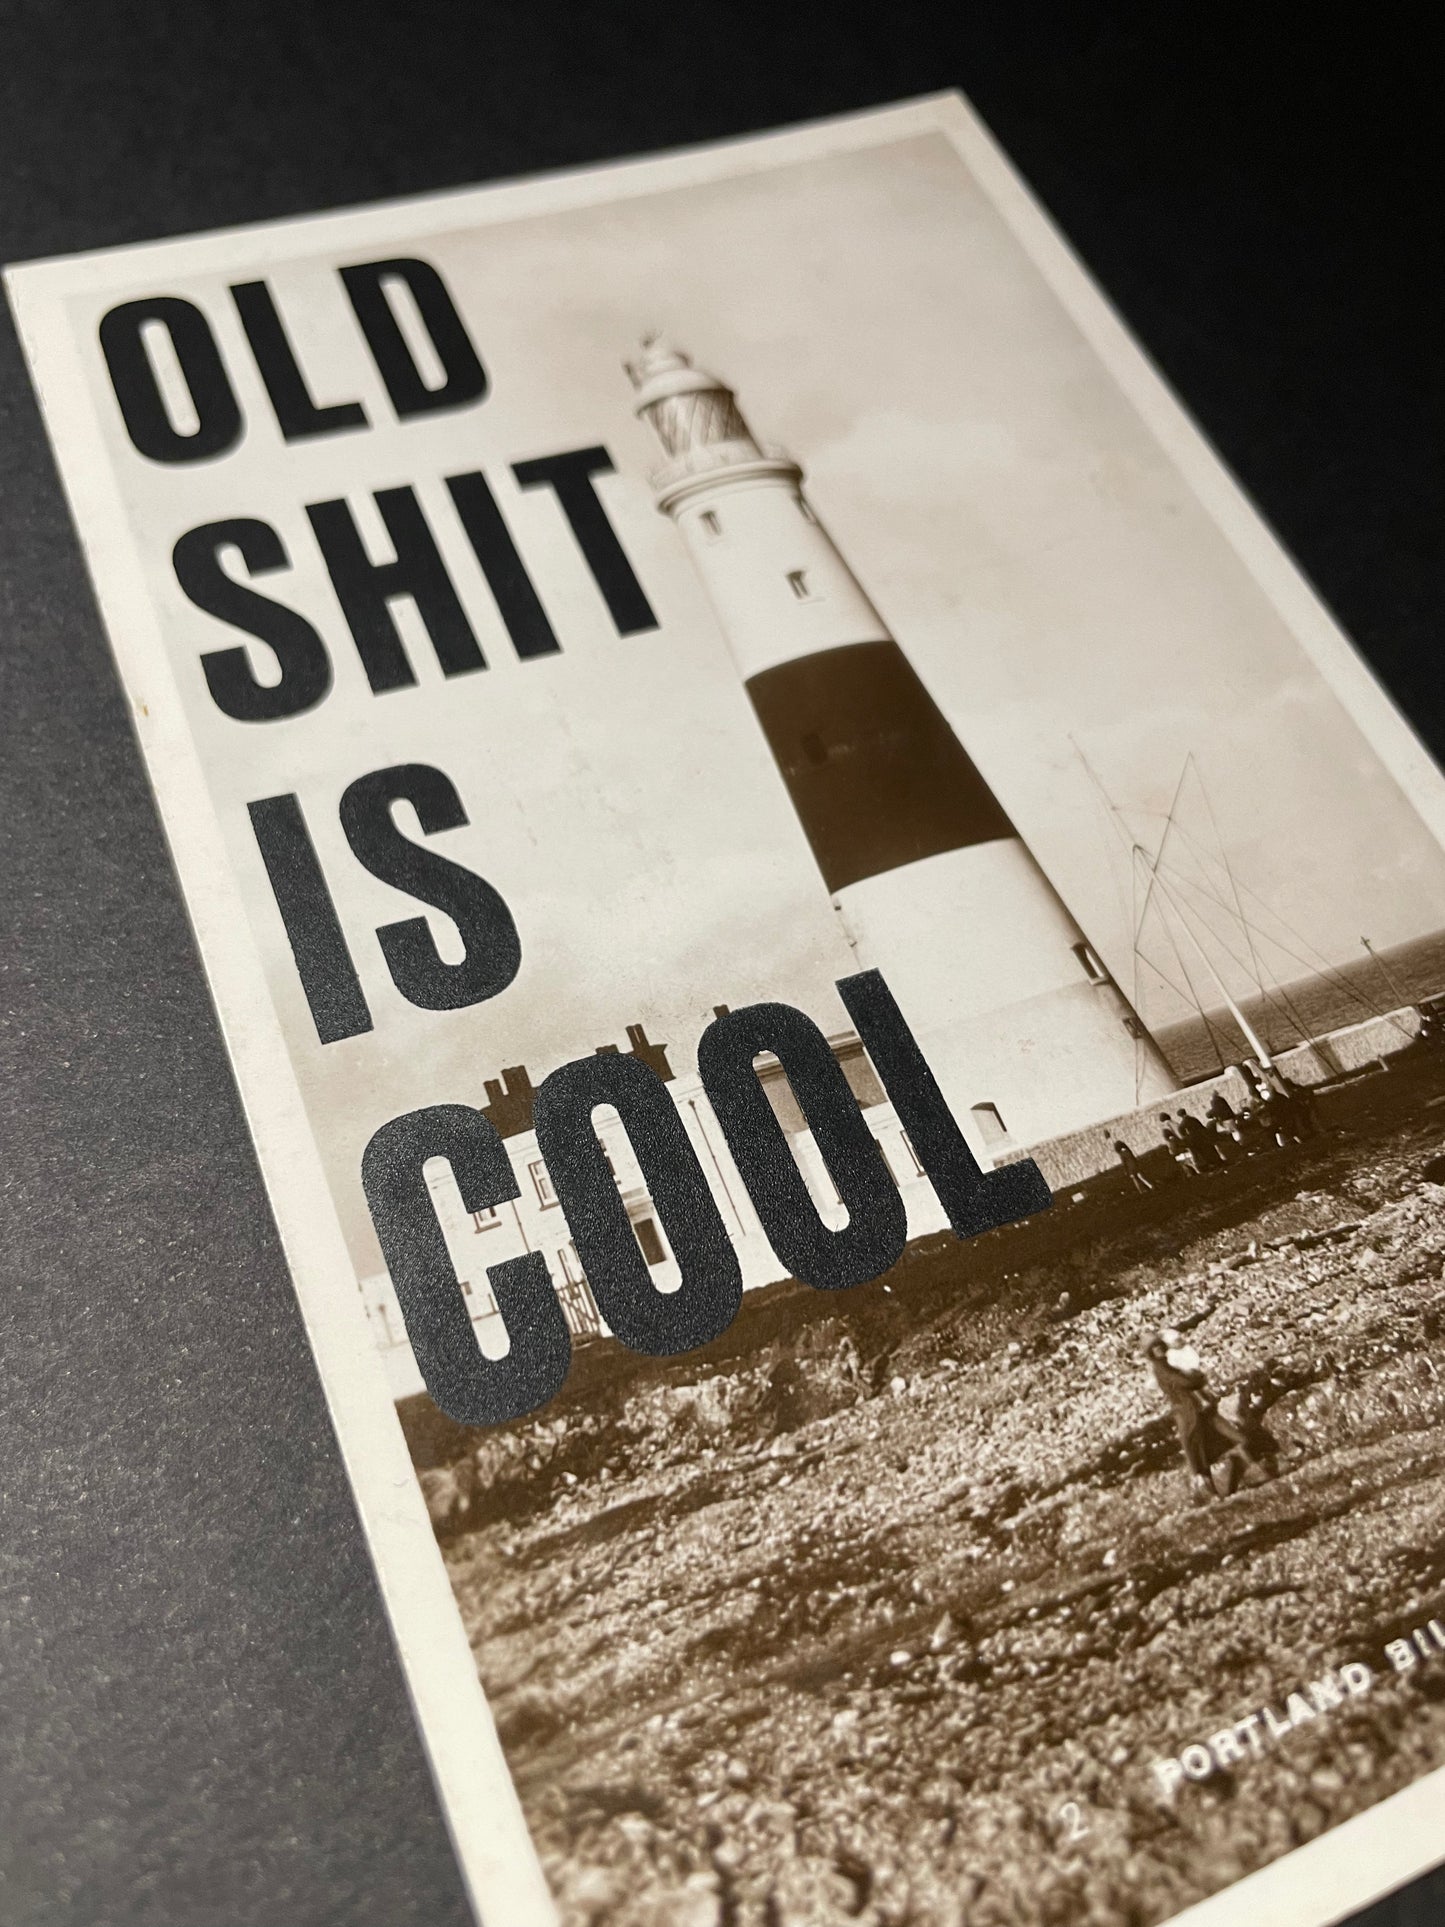 Old Shit Is Cool - Portland Bill Lighthouse #2